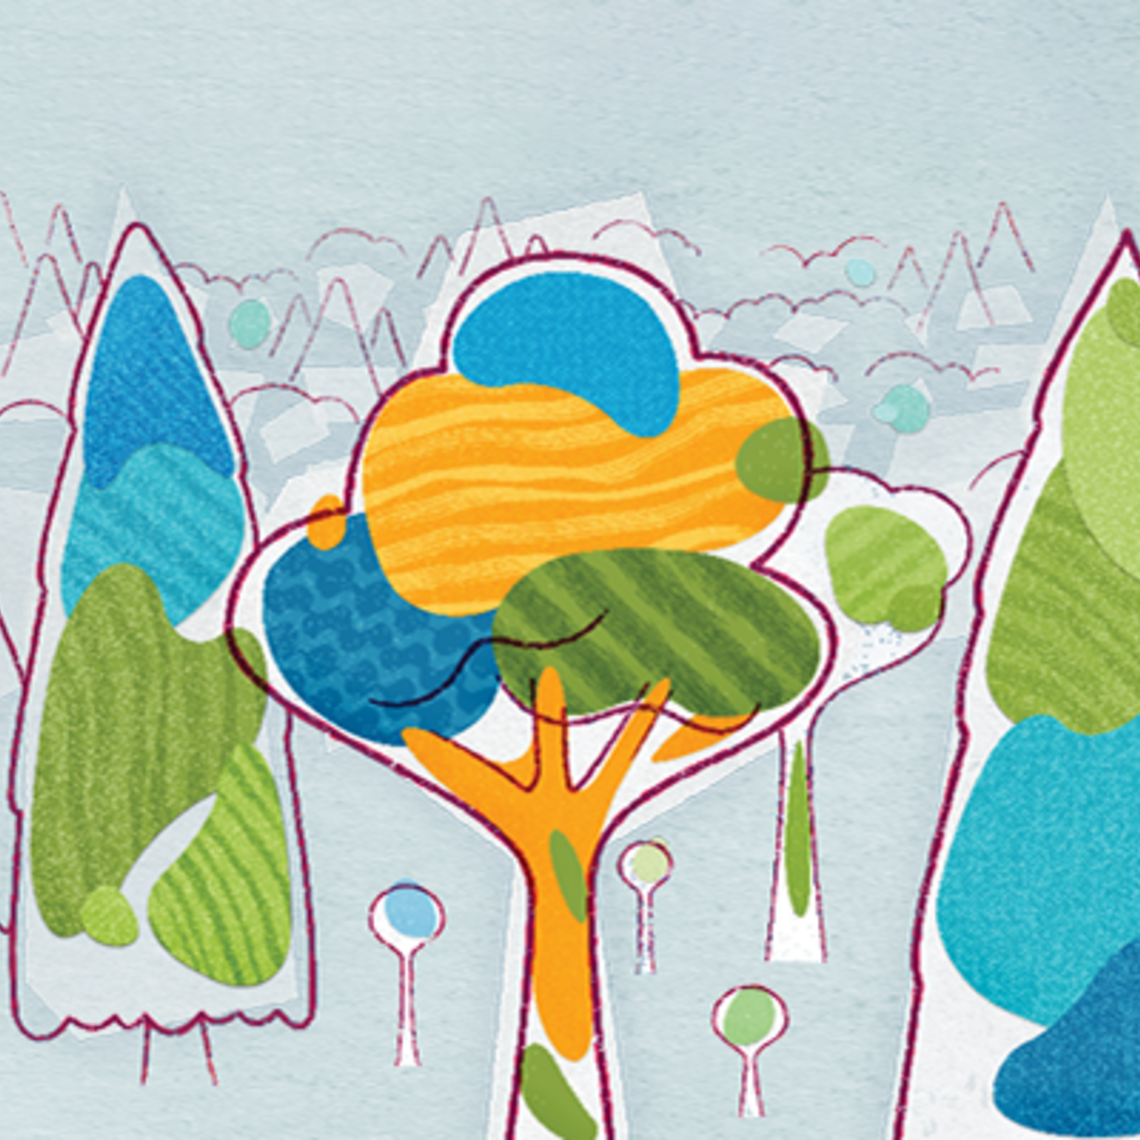 A colourful cluster of illustrated trees.